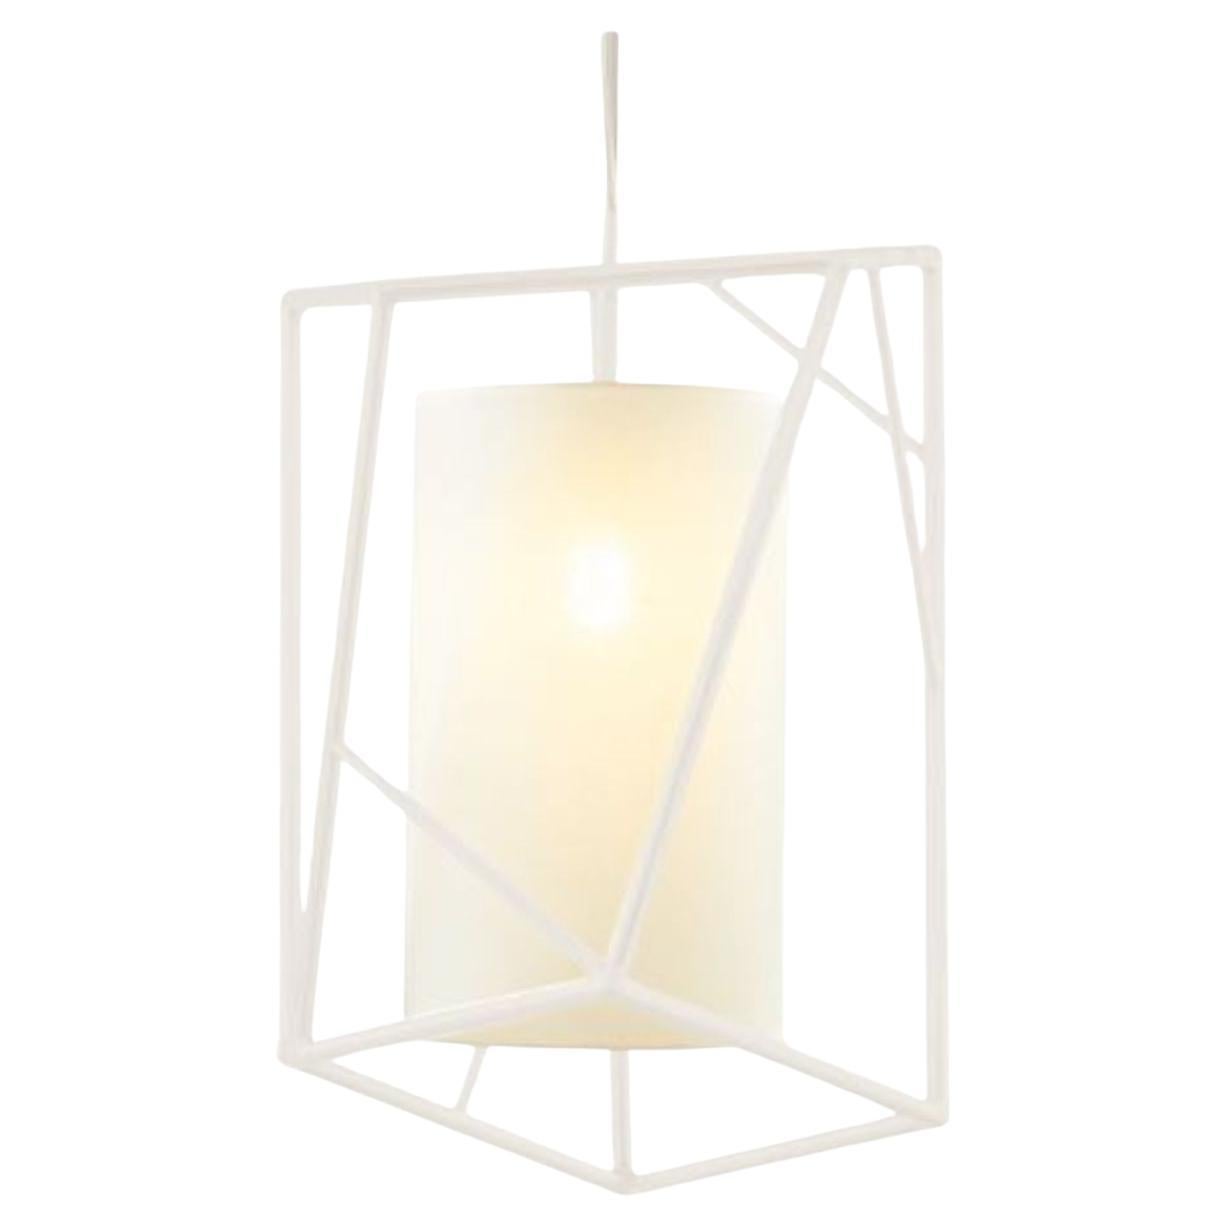 Ivory Star III Suspension Lamp by Dooq